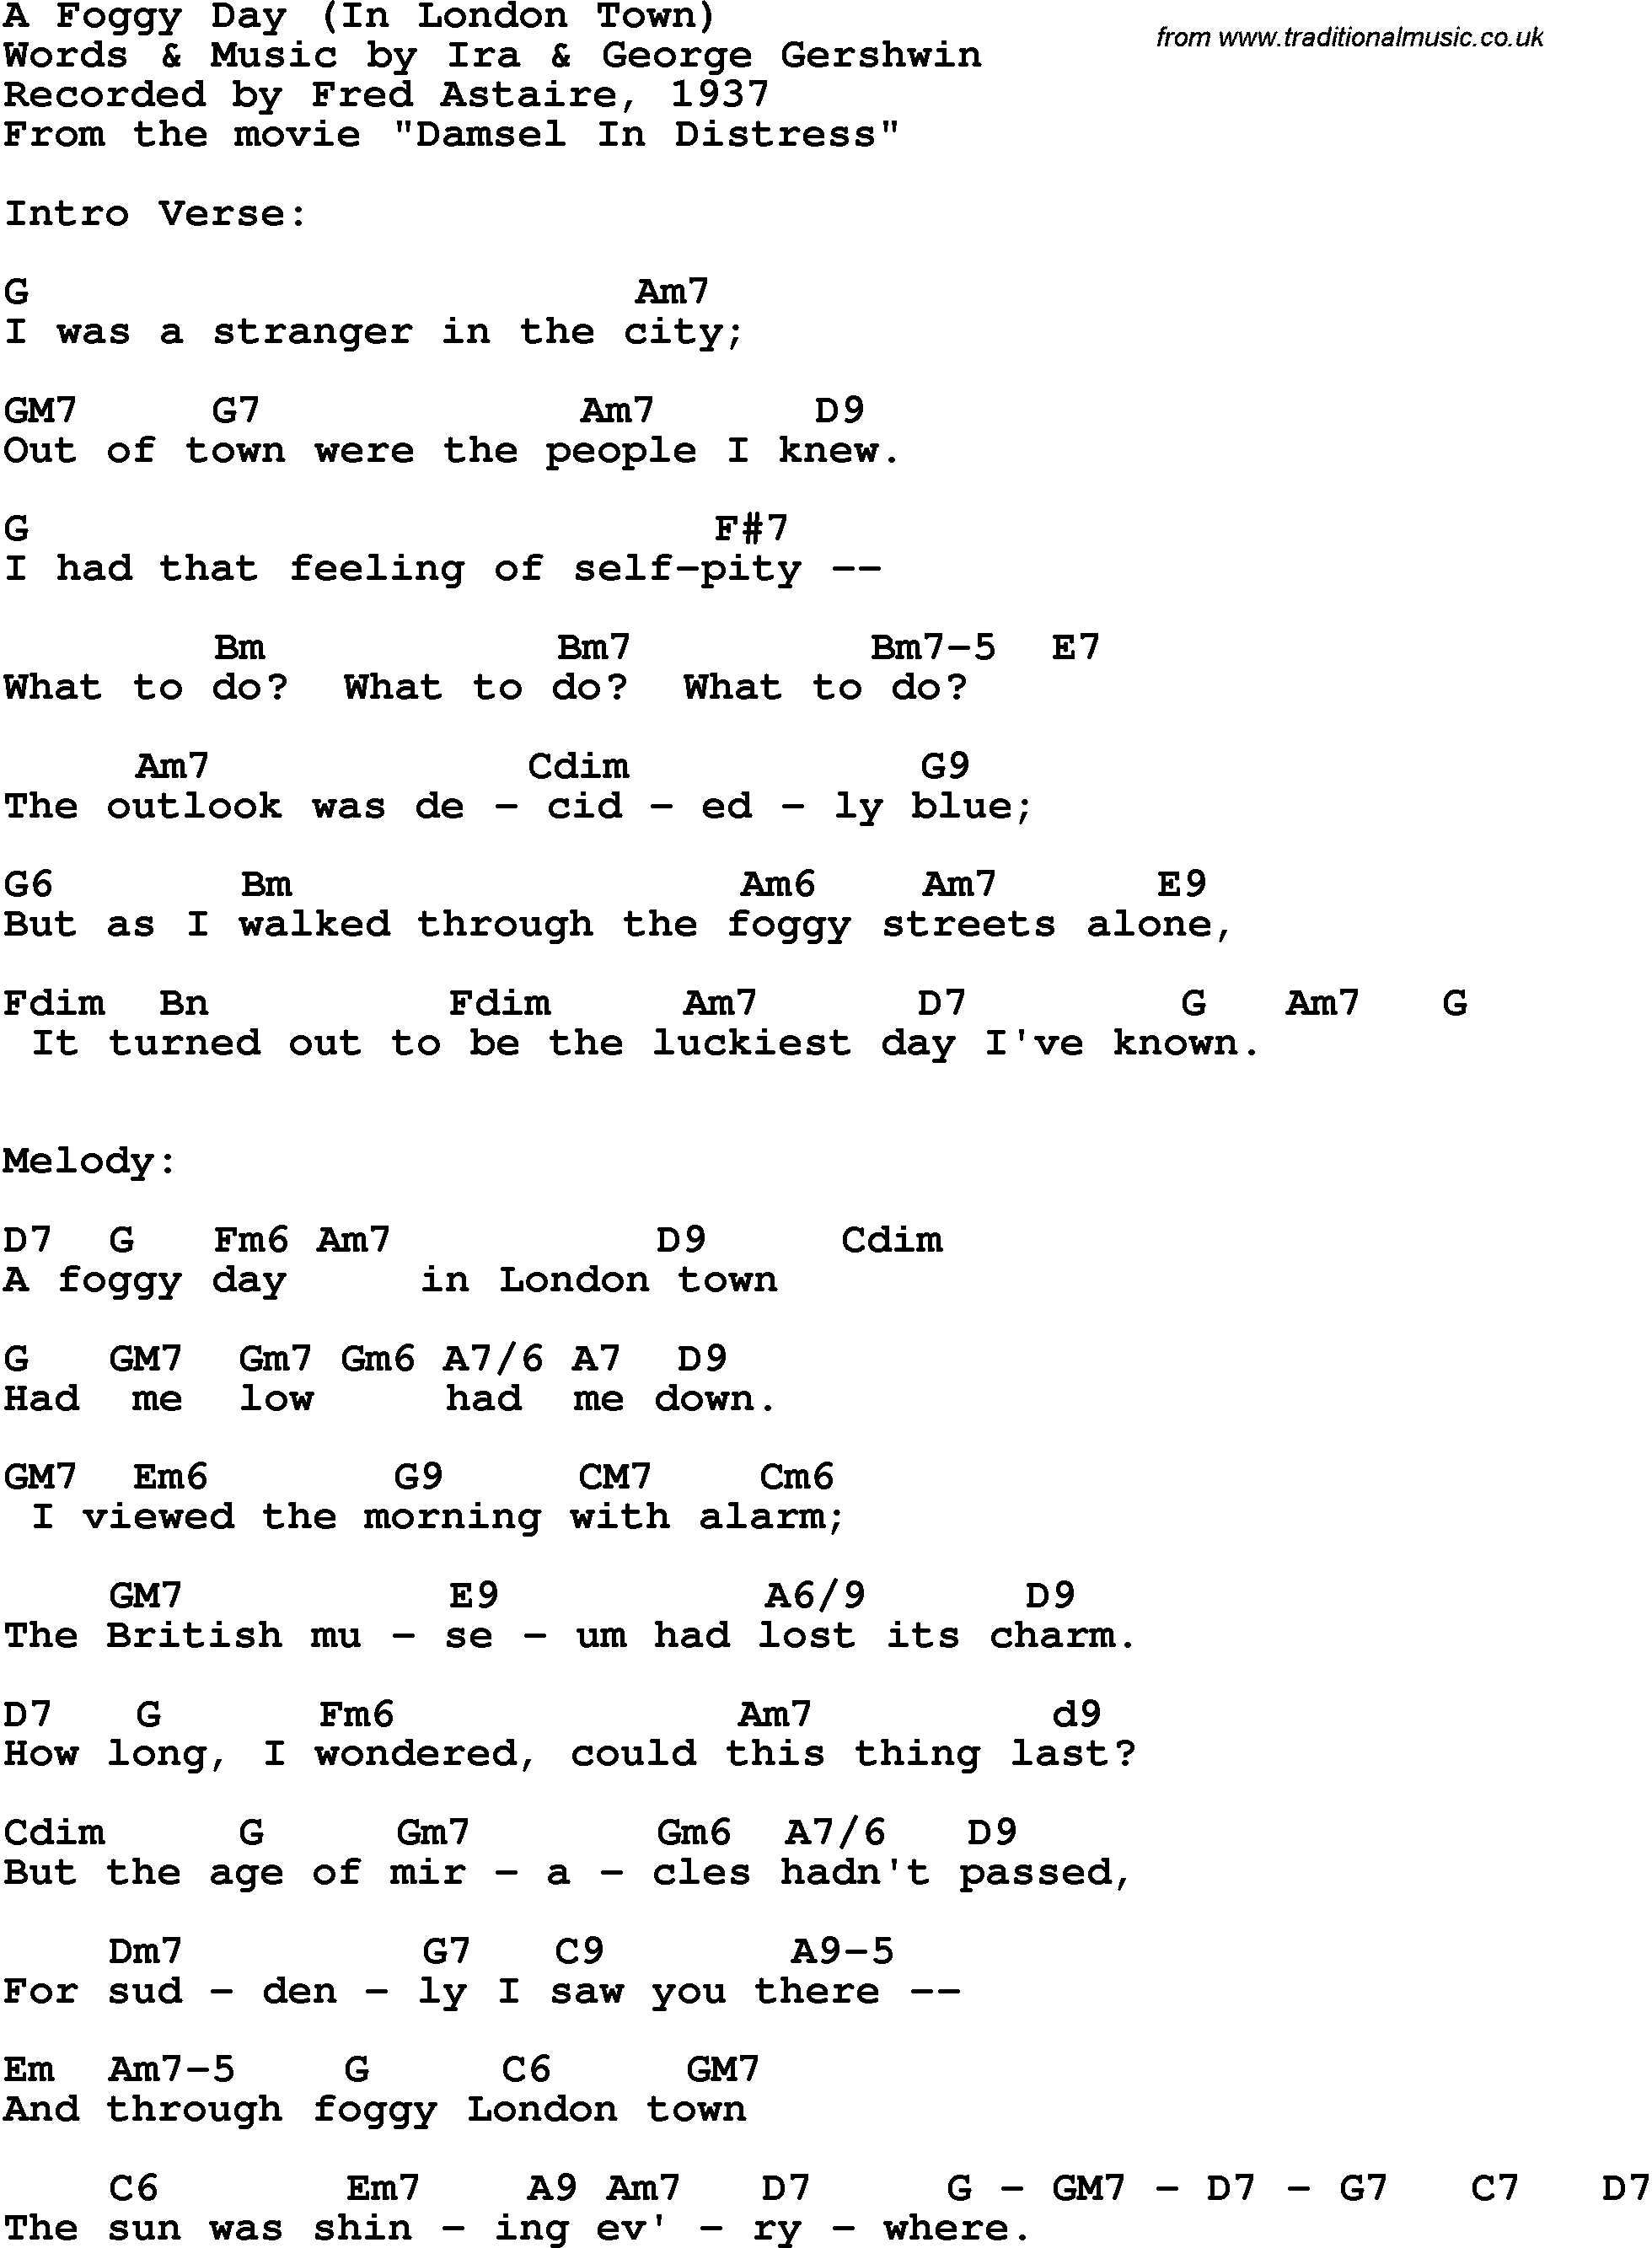 Song Lyrics with guitar chords for A Foggy Day (In London Town) - Fred Astaire, 1937